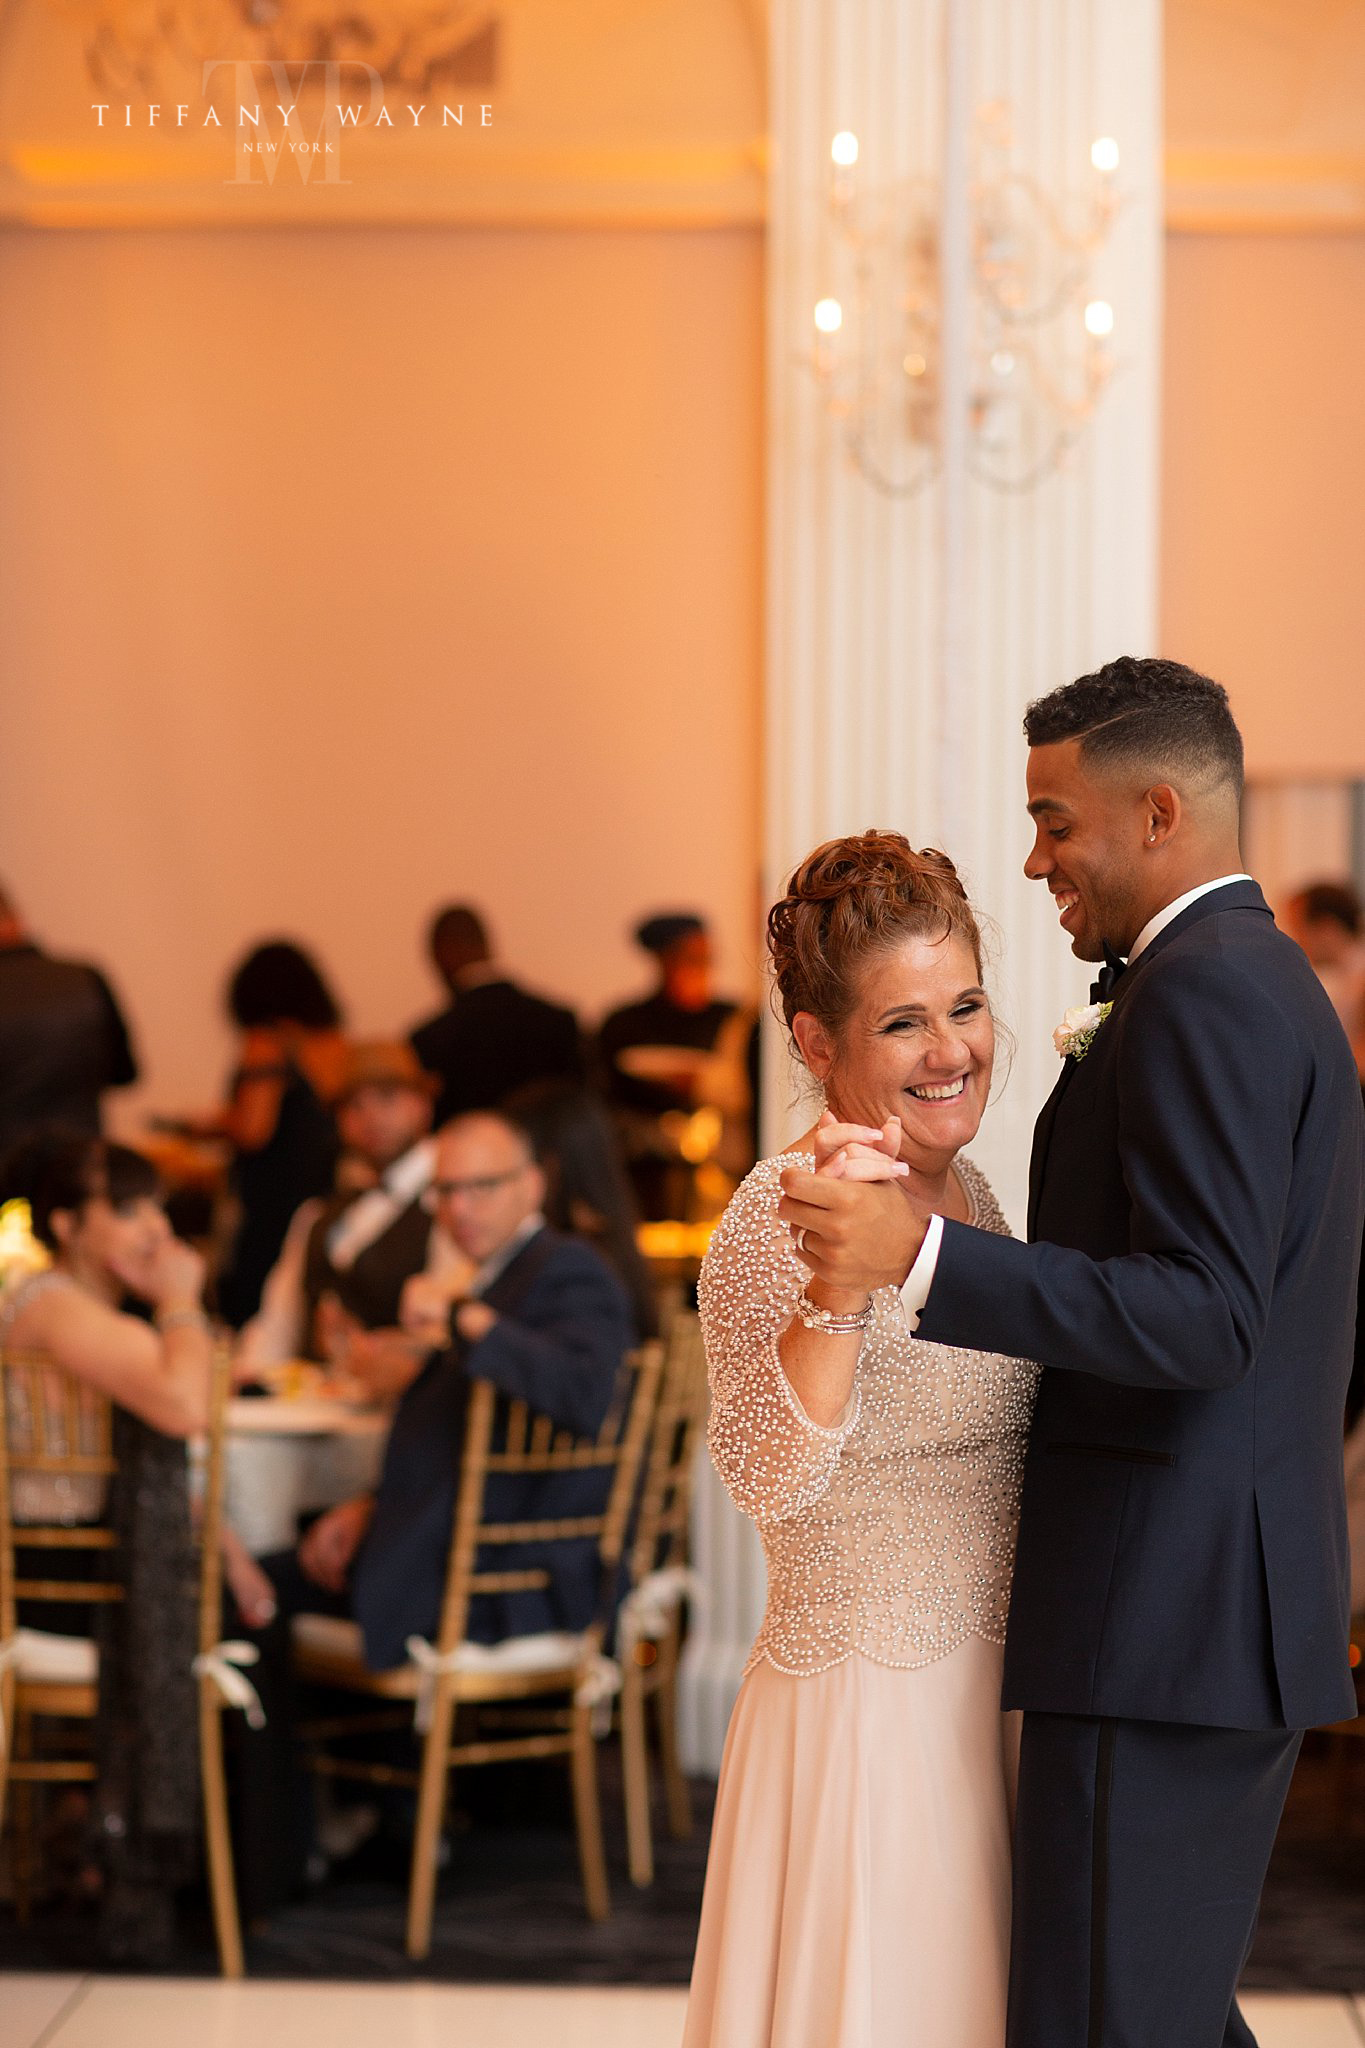 groom and mother on wedding day photographed by Tiffany Wayne Photography